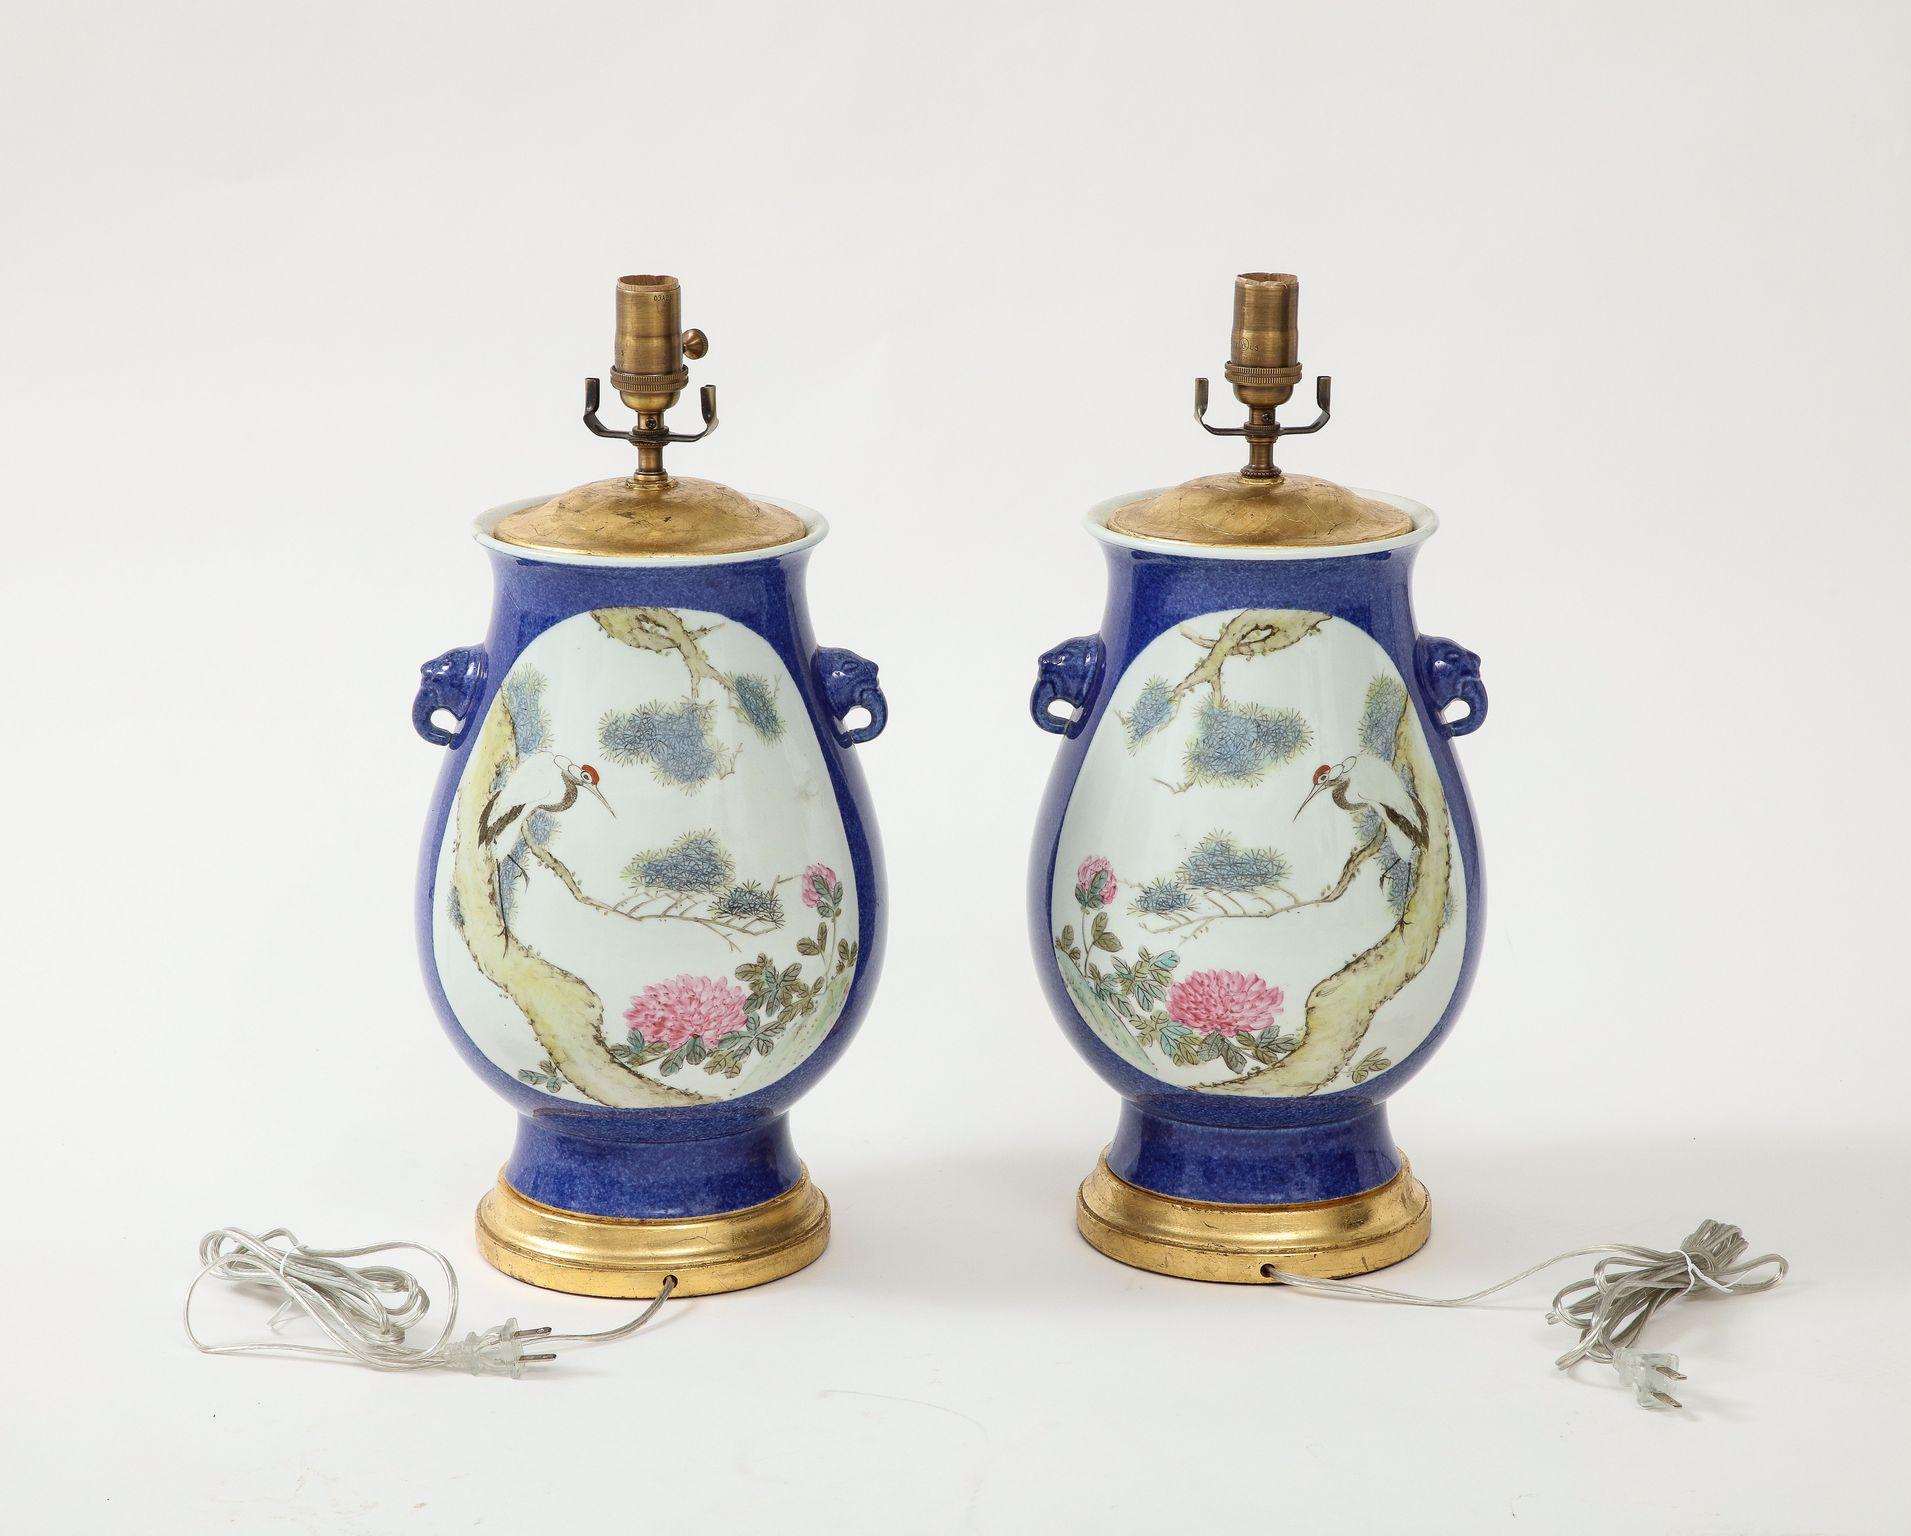 These lamps are special for their stunning color. The urn-shaped body of the lamps is a bright, beautiful blue glaze, with a center medallion decorated with a scenic scene of flowers and birds in soft pastel colors. The giltwood base finishes the